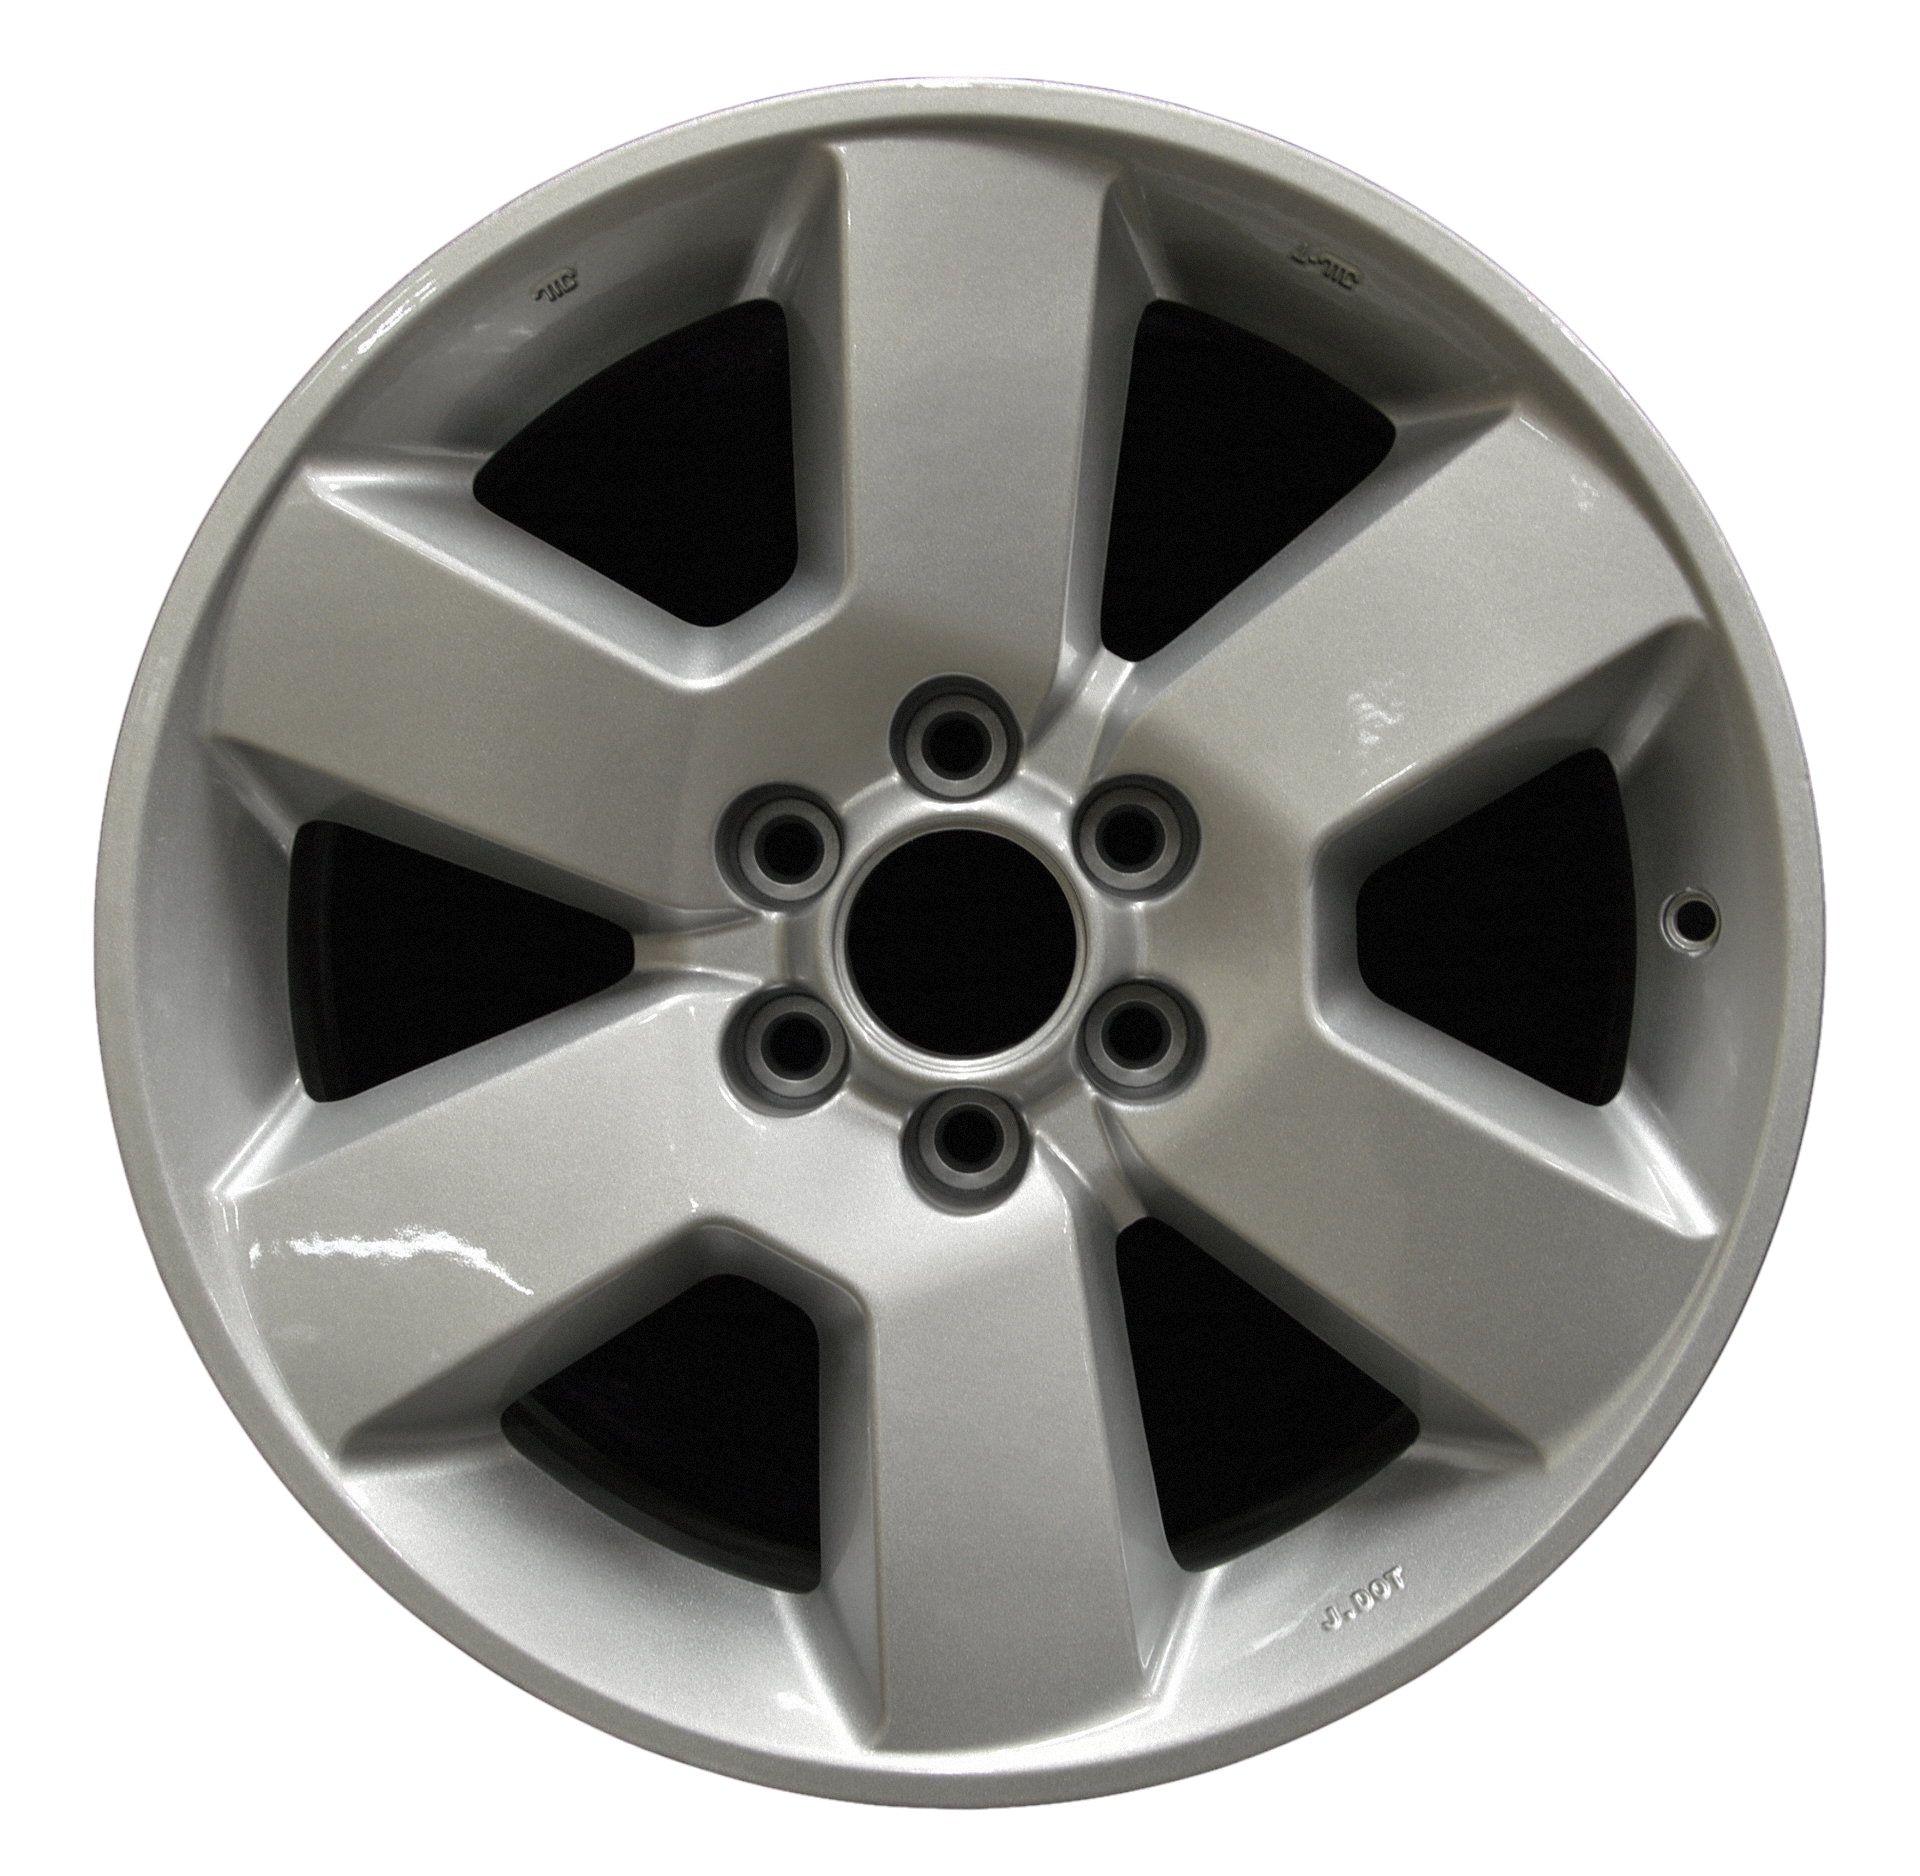 Nissan Pathfinder  2008, 2009, 2010, 2011, 2012 Factory OEM Car Wheel Size 17x7.5 Alloy WAO.62496.PS13.FF